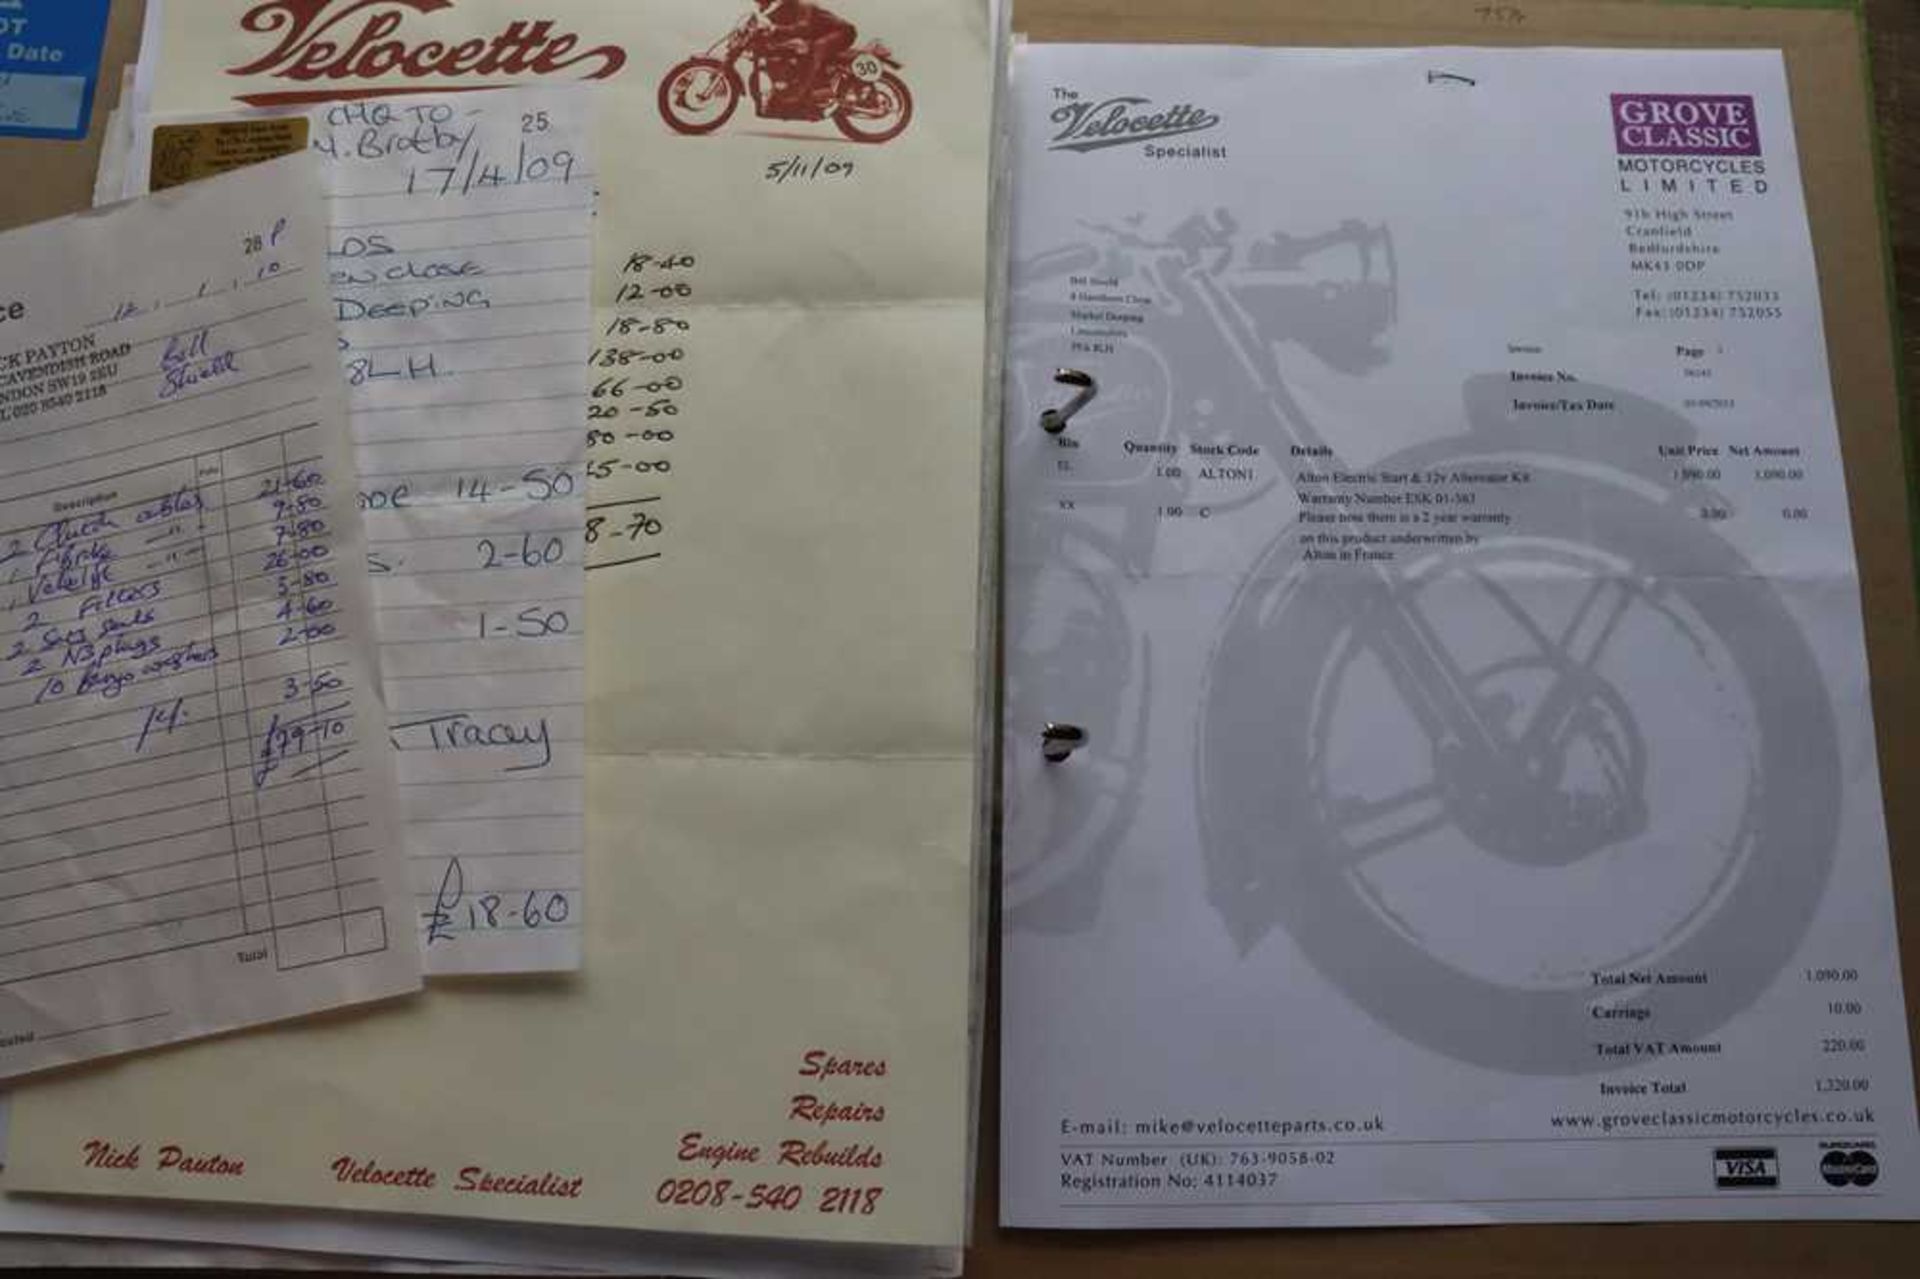 1954 Velocette MSS Fitted with an Alton electric starter kit - Image 35 of 41